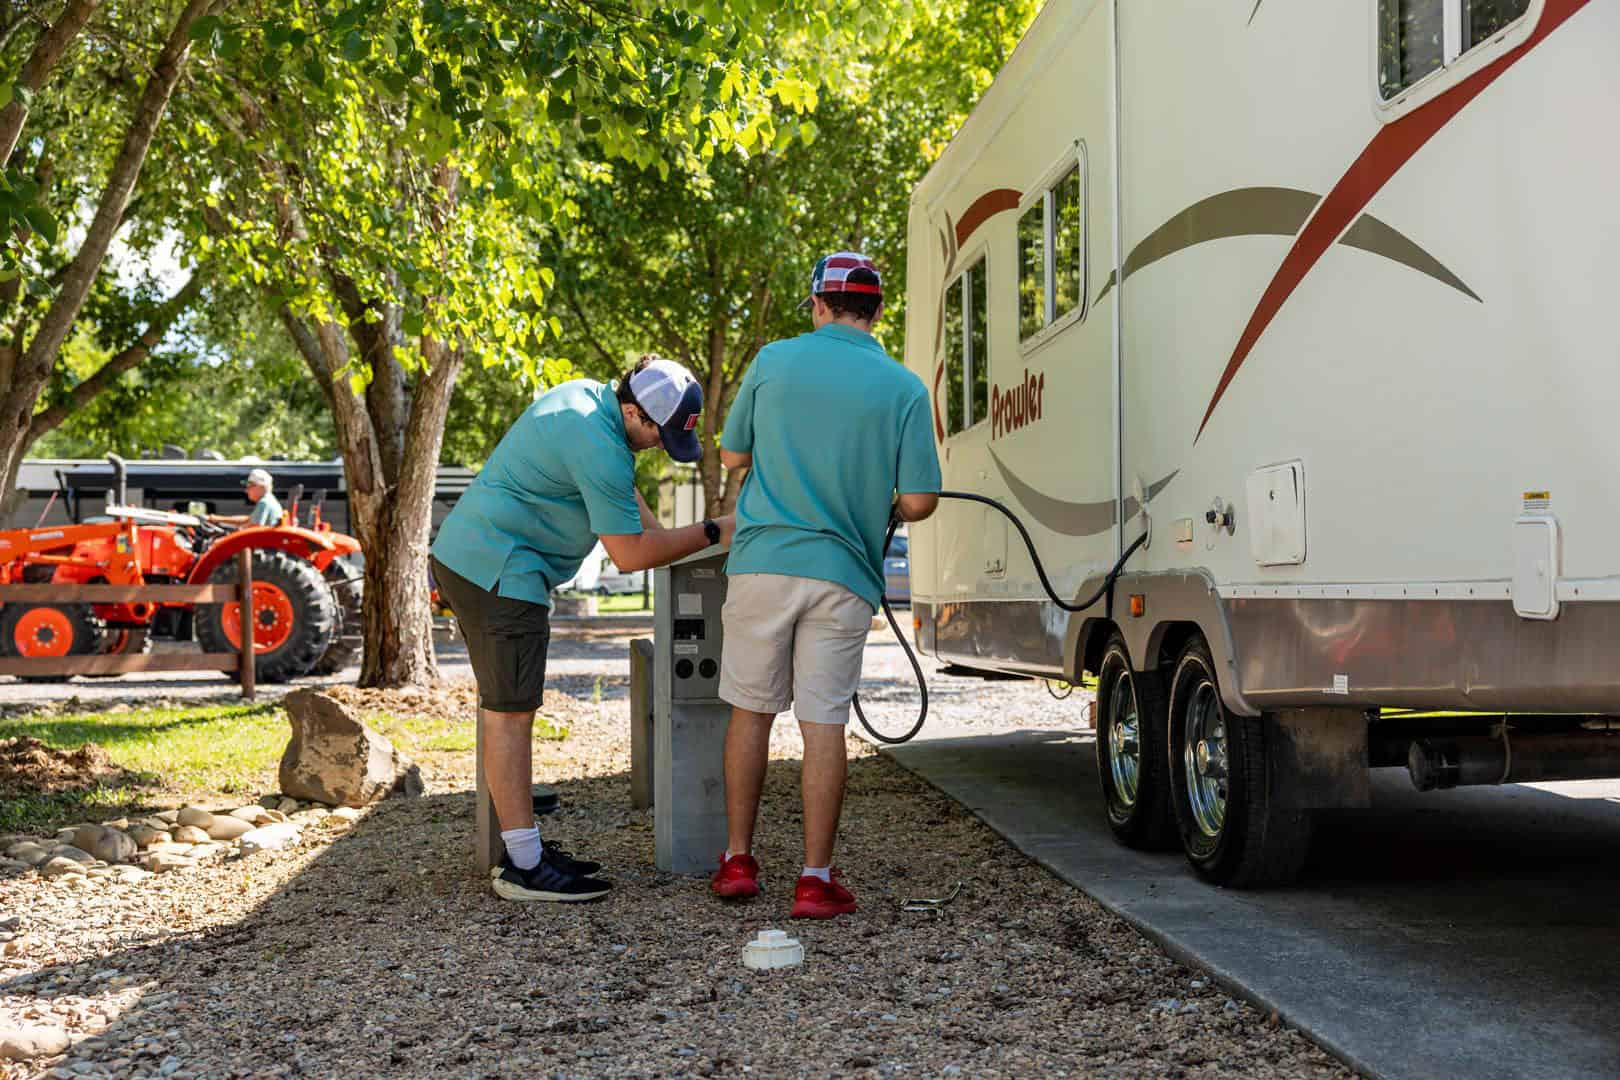 Two men are diligently working on a RV at the Big Meadows Campground.